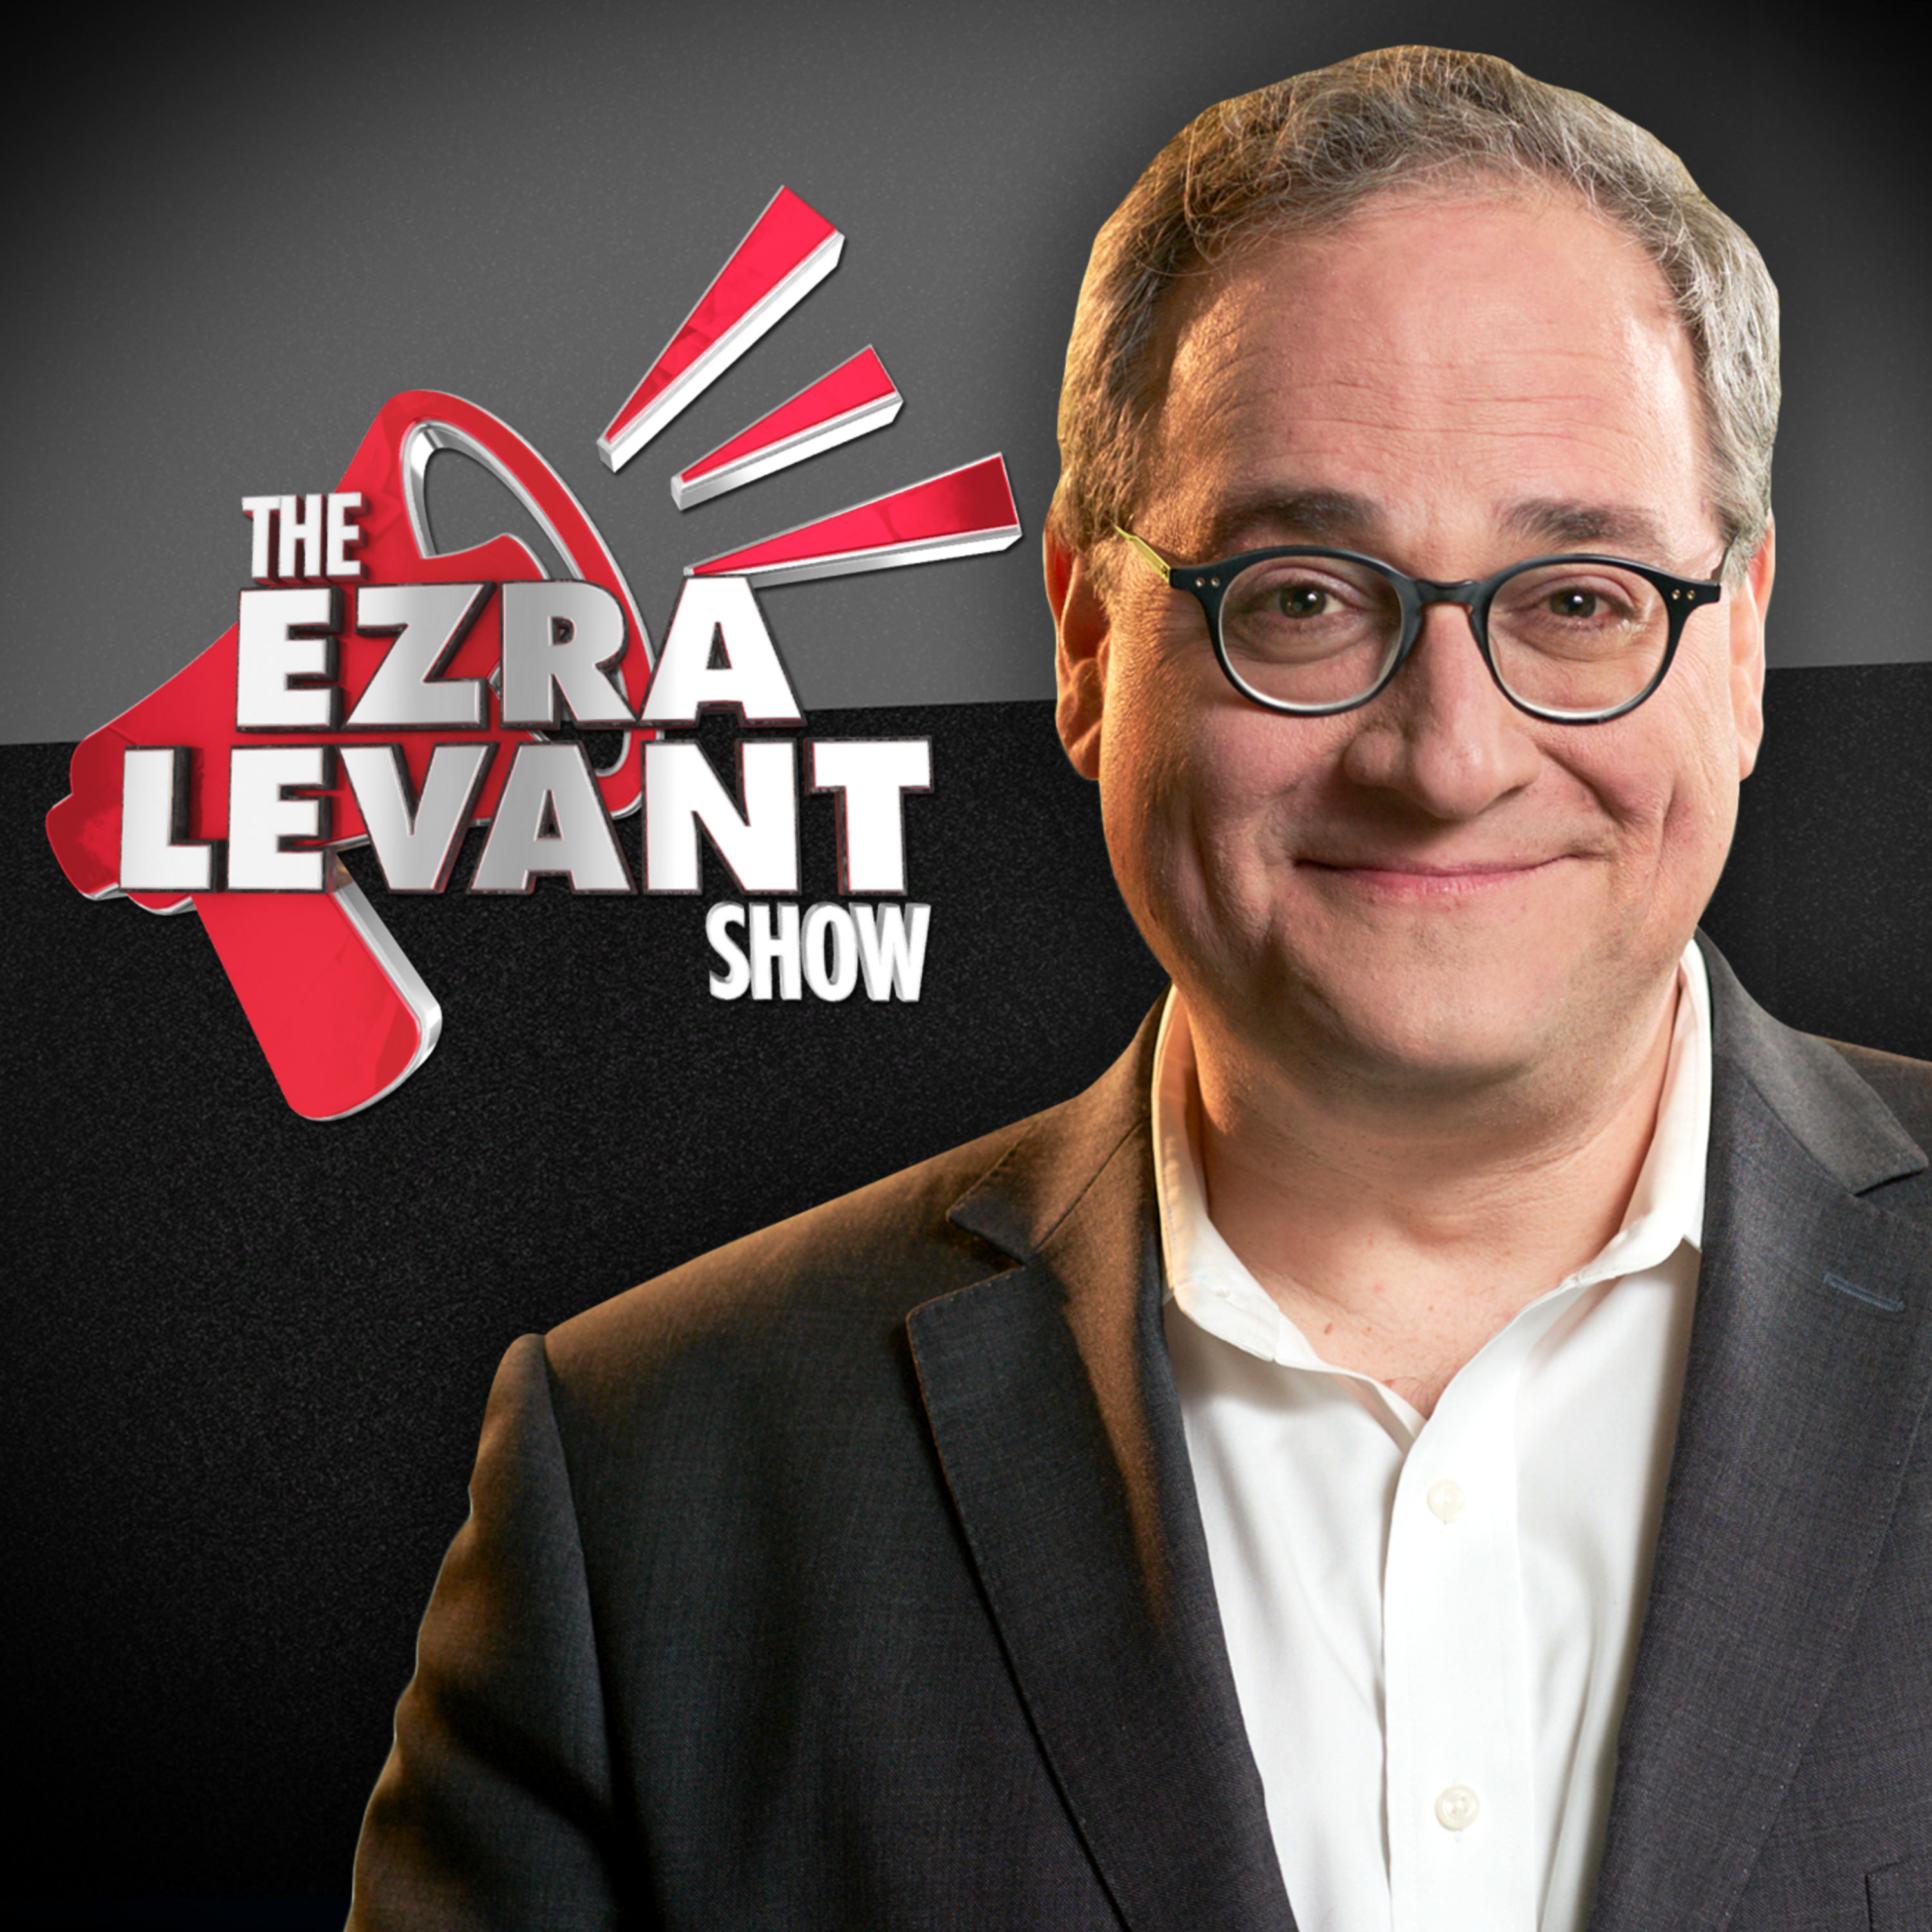 EZRA LEVANT | Rebel journalists arrive in Switzerland! I’ll show you what they’re doing already